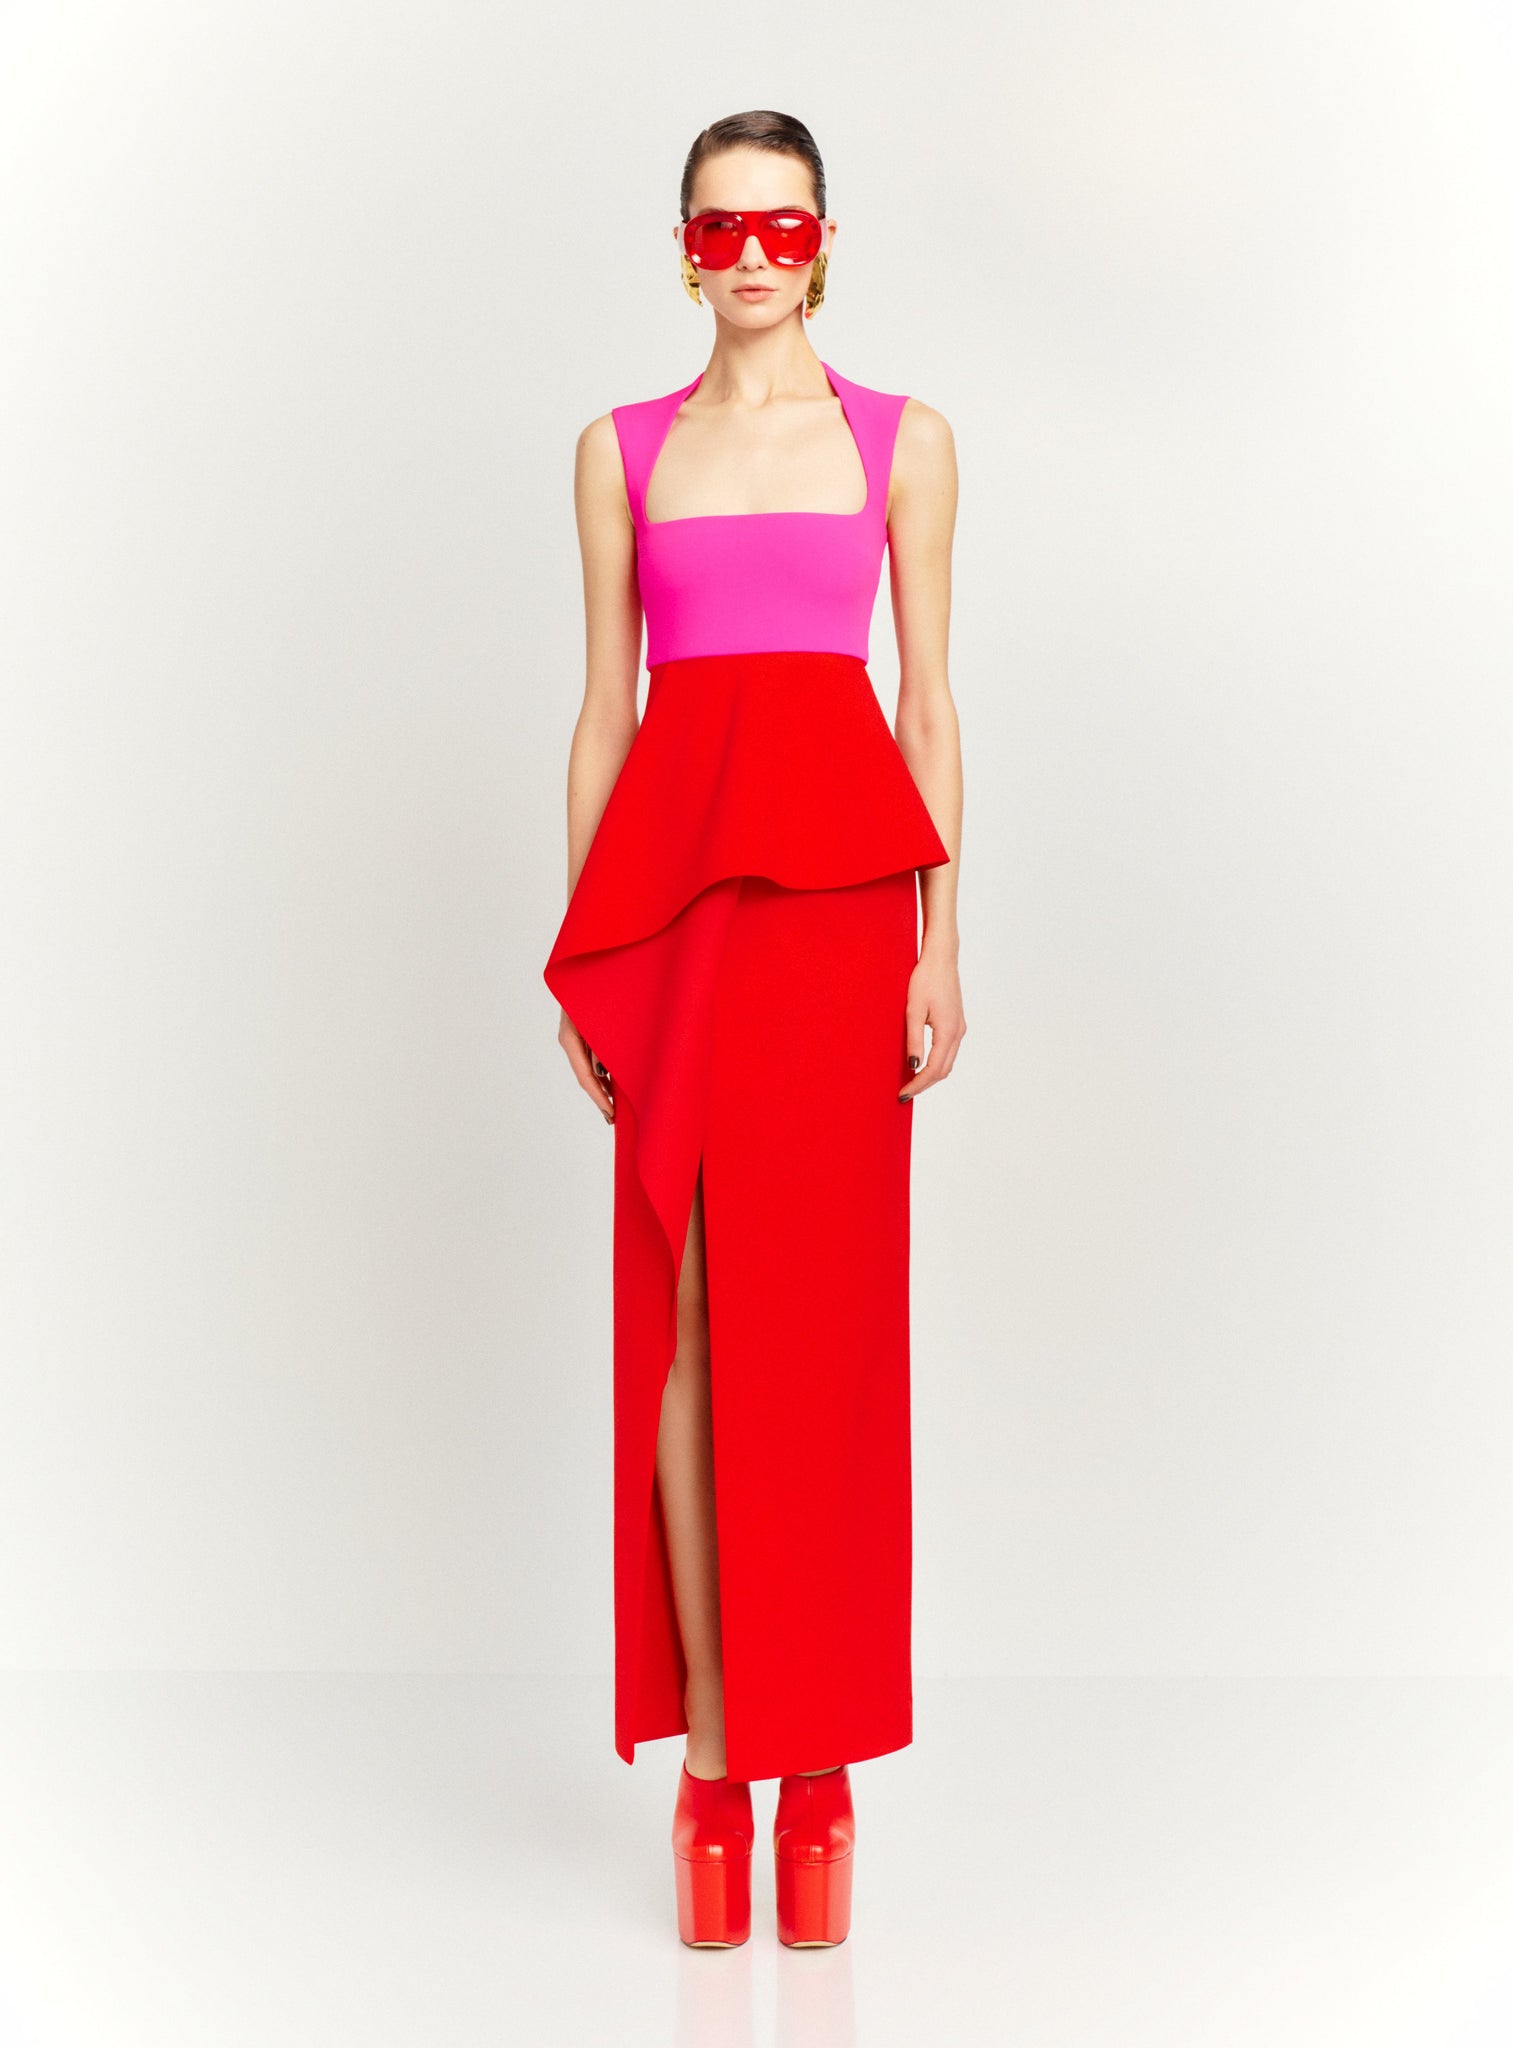 The Ally Maxi Dress in Pink and Red